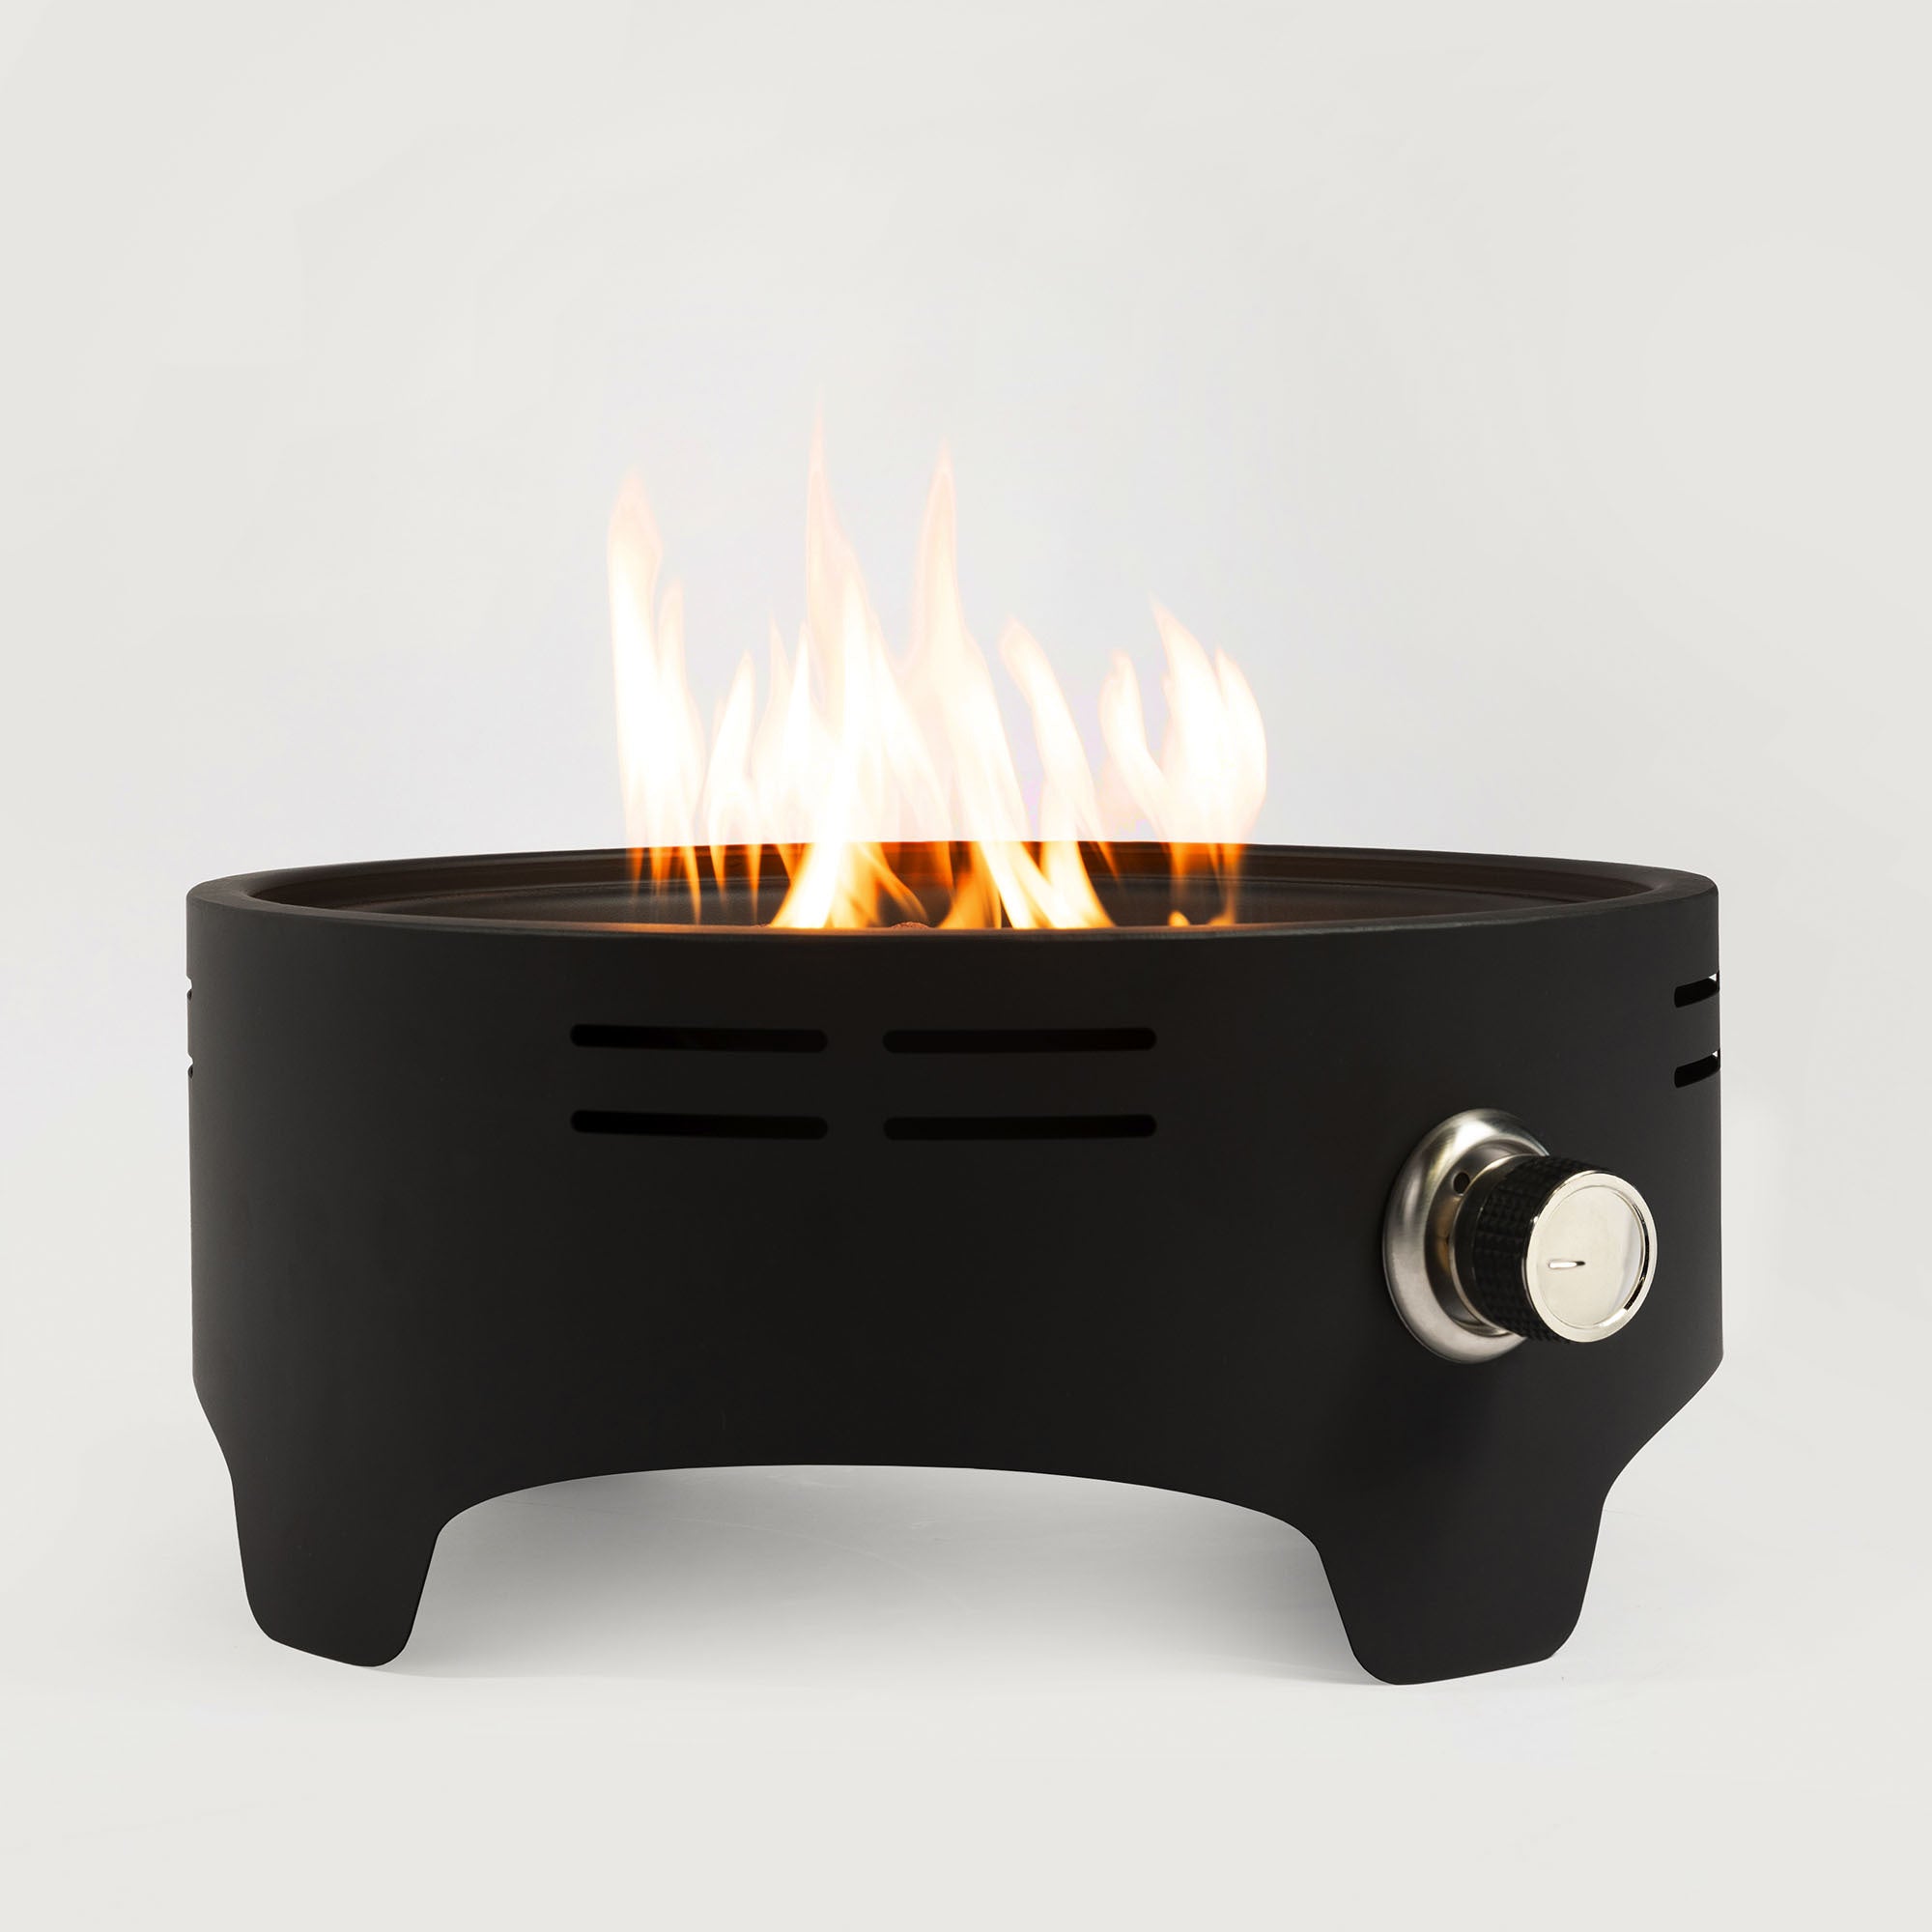 15 inch Outdoor Portable Propane Fire Pit, Camping black-steel